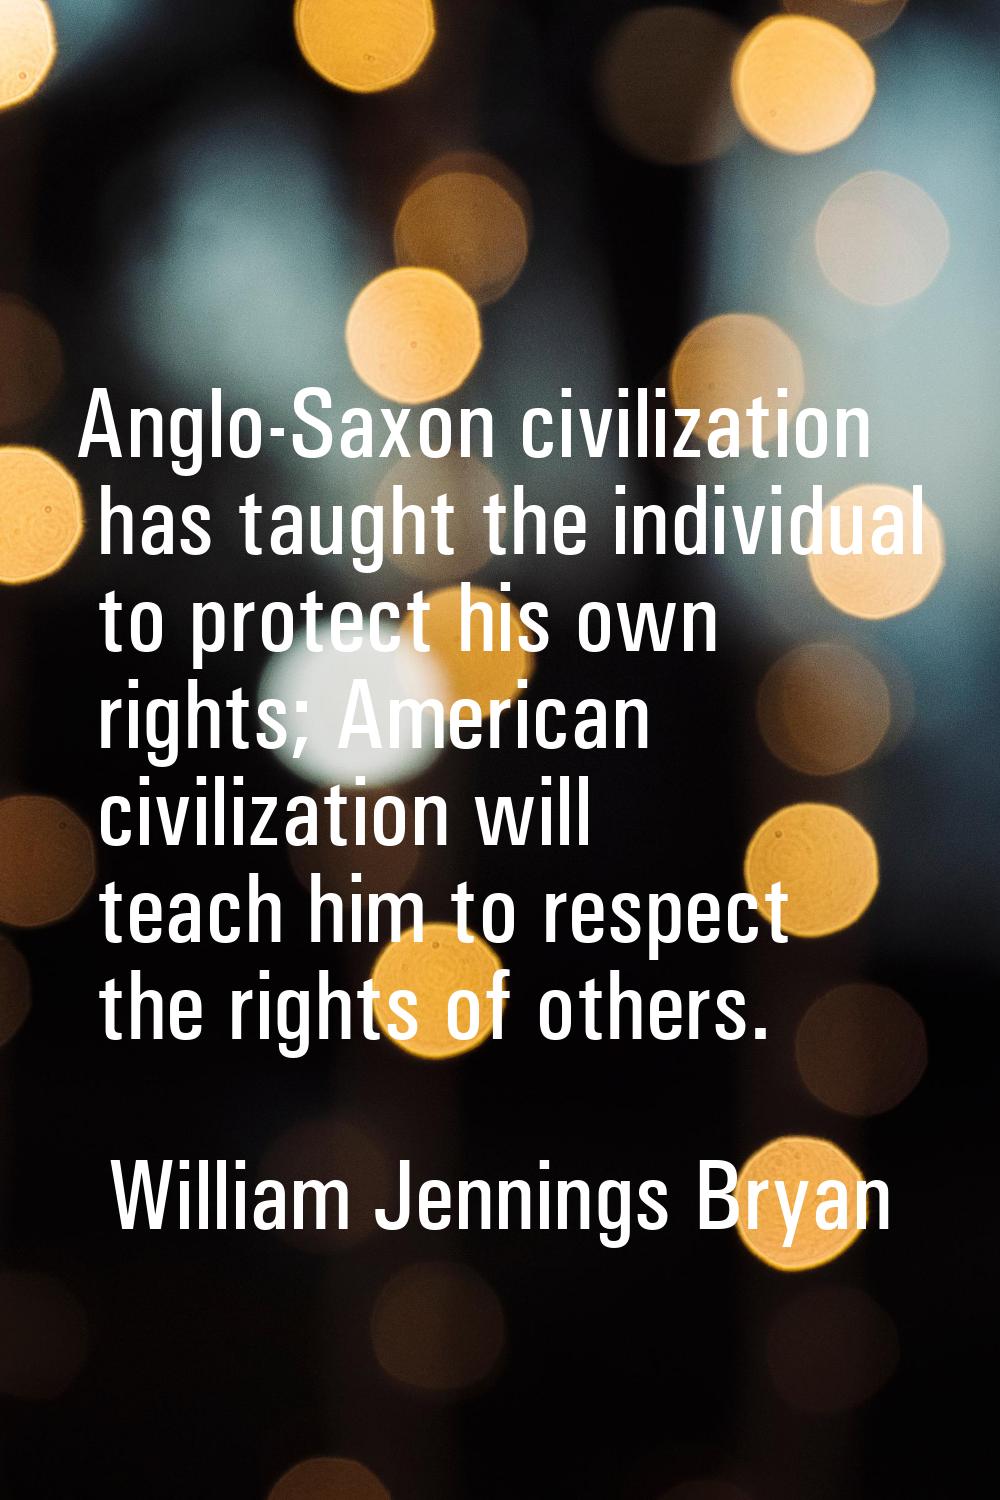 Anglo-Saxon civilization has taught the individual to protect his own rights; American civilization